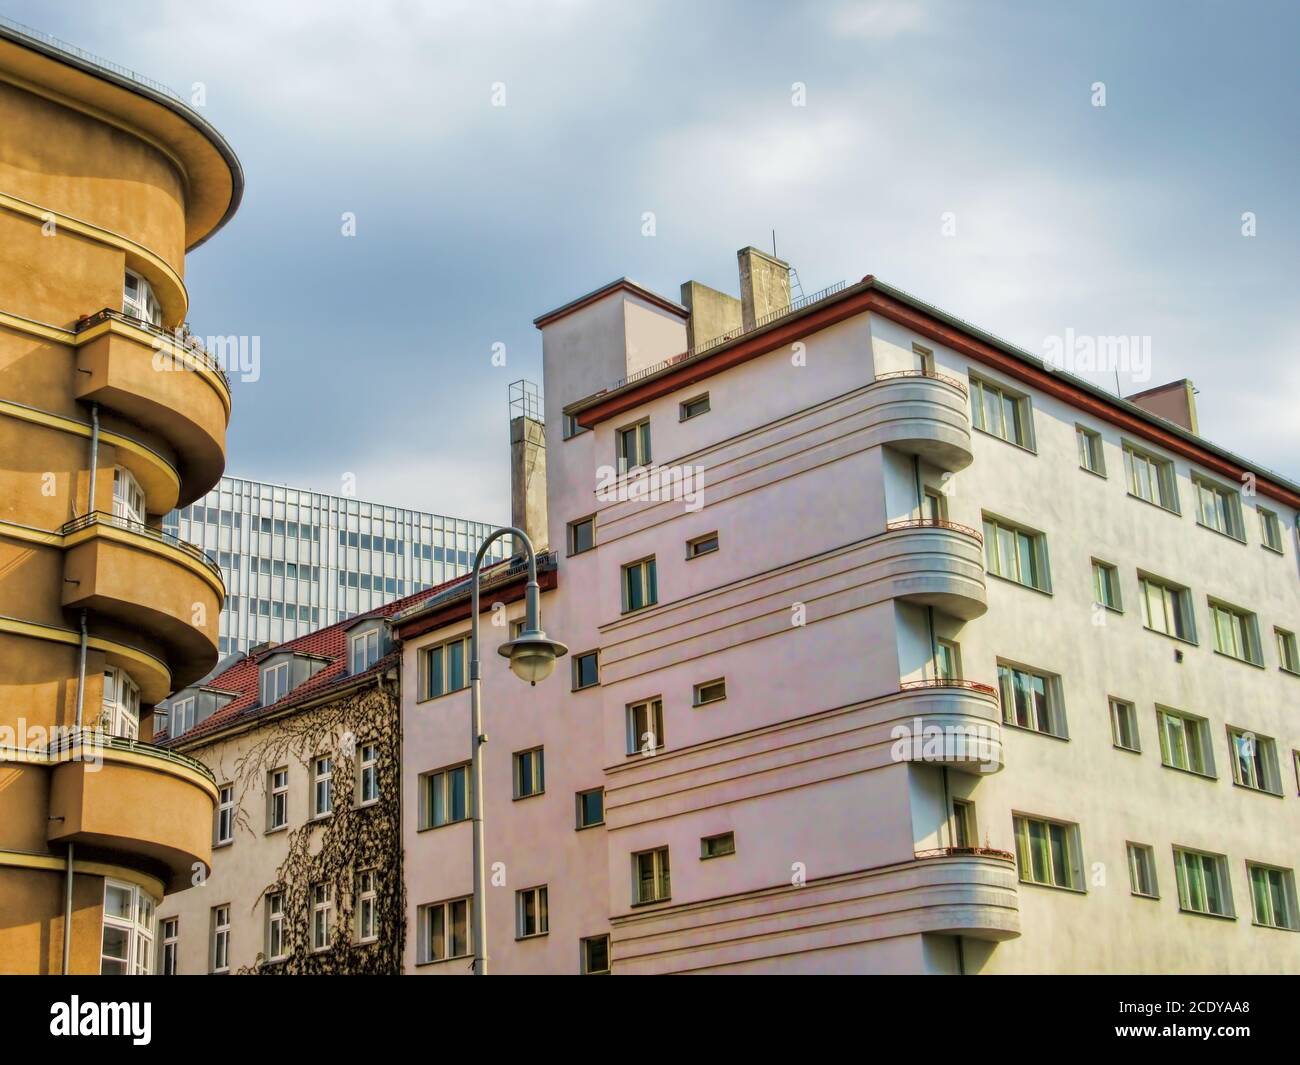 Contrasts of architecture in Berlin Mitte, Germany Stock Photo